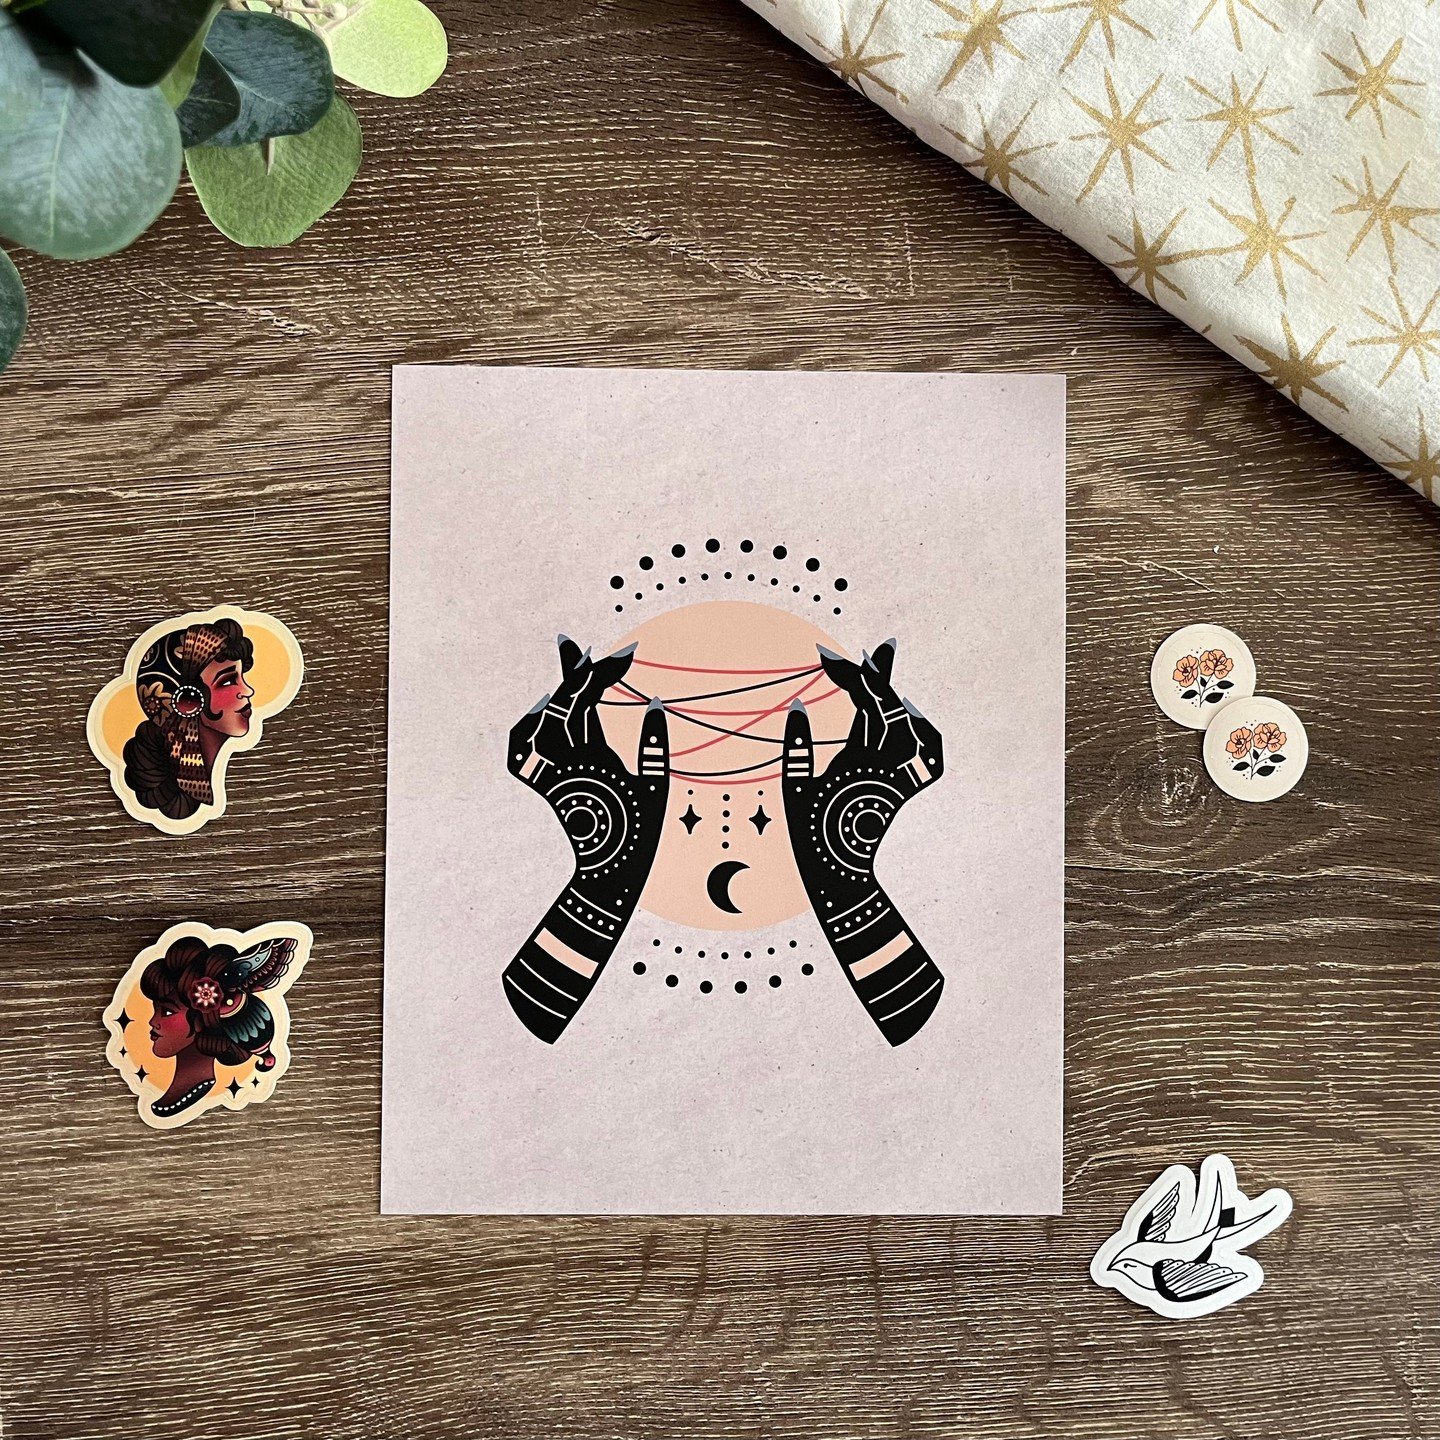 ✨ Celestial Strings ✨

Add a little touch of magic to your decor with this lovely tattoo-inspired print, available now on Inkdarling.com!

.
.
.

Share the magic! If you're inspired by this post, I invite you to share it in your story and tag me! ✨ C